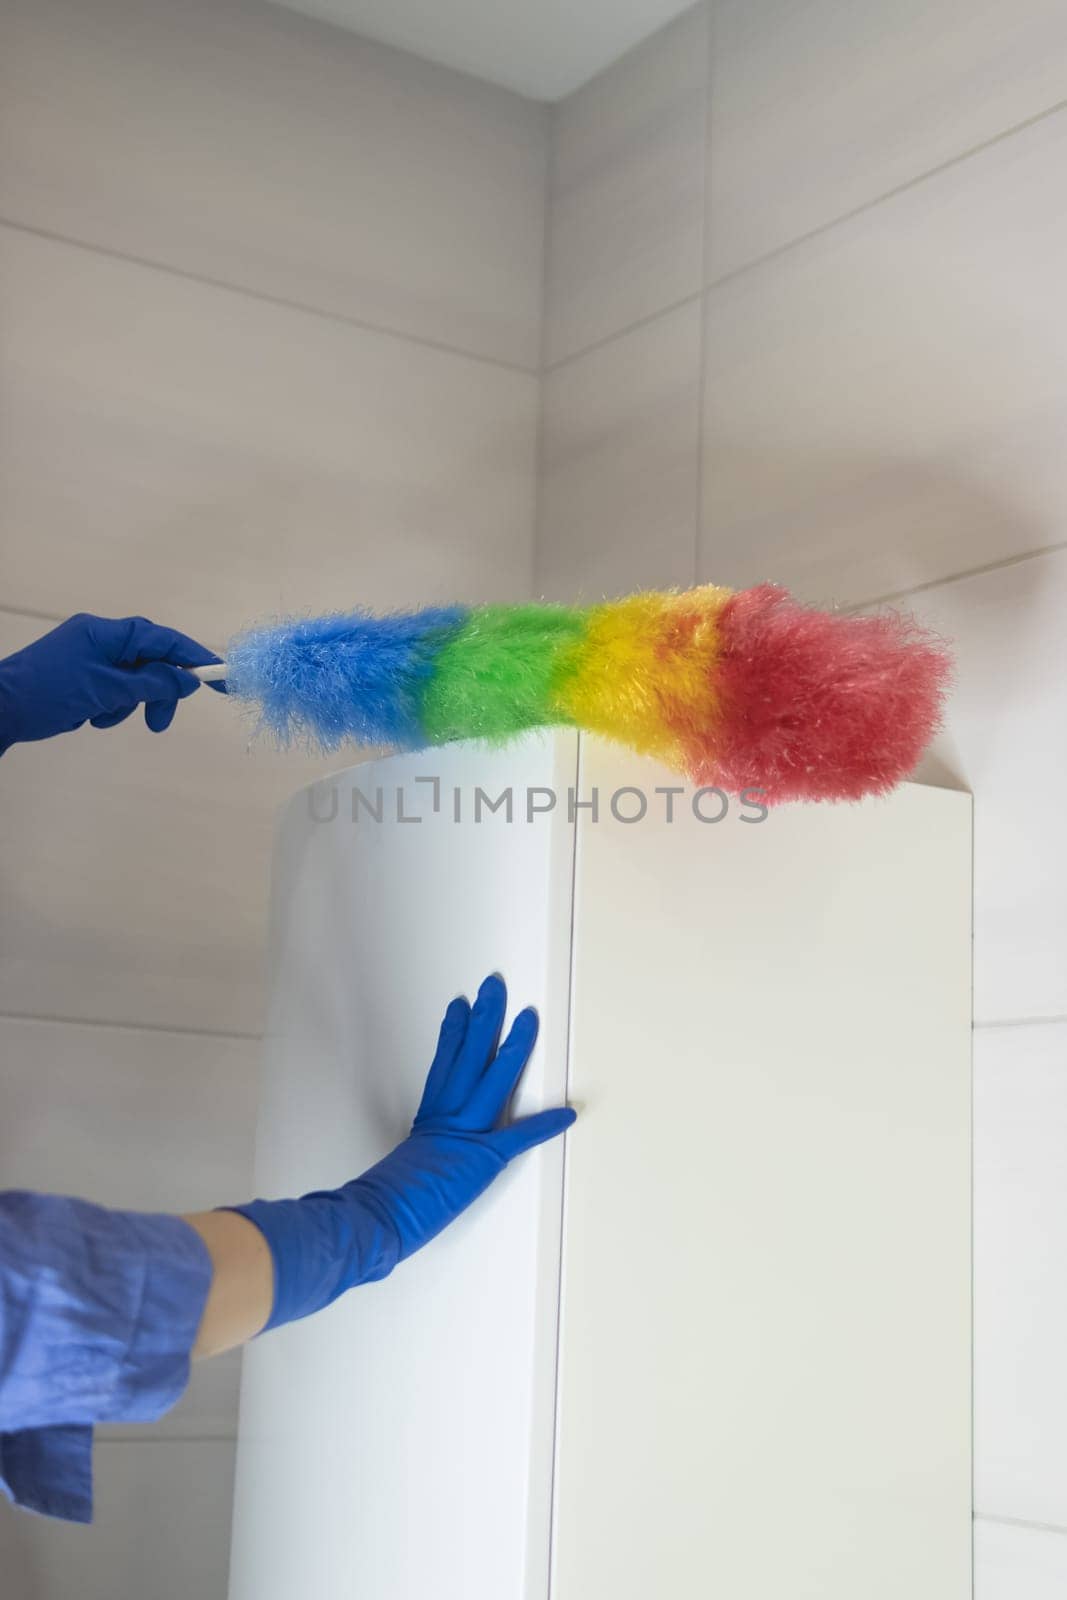 A girl in blue gloves and a blue shirt cleans the dust in the bathroom with a colored napkin, housekeeping concept